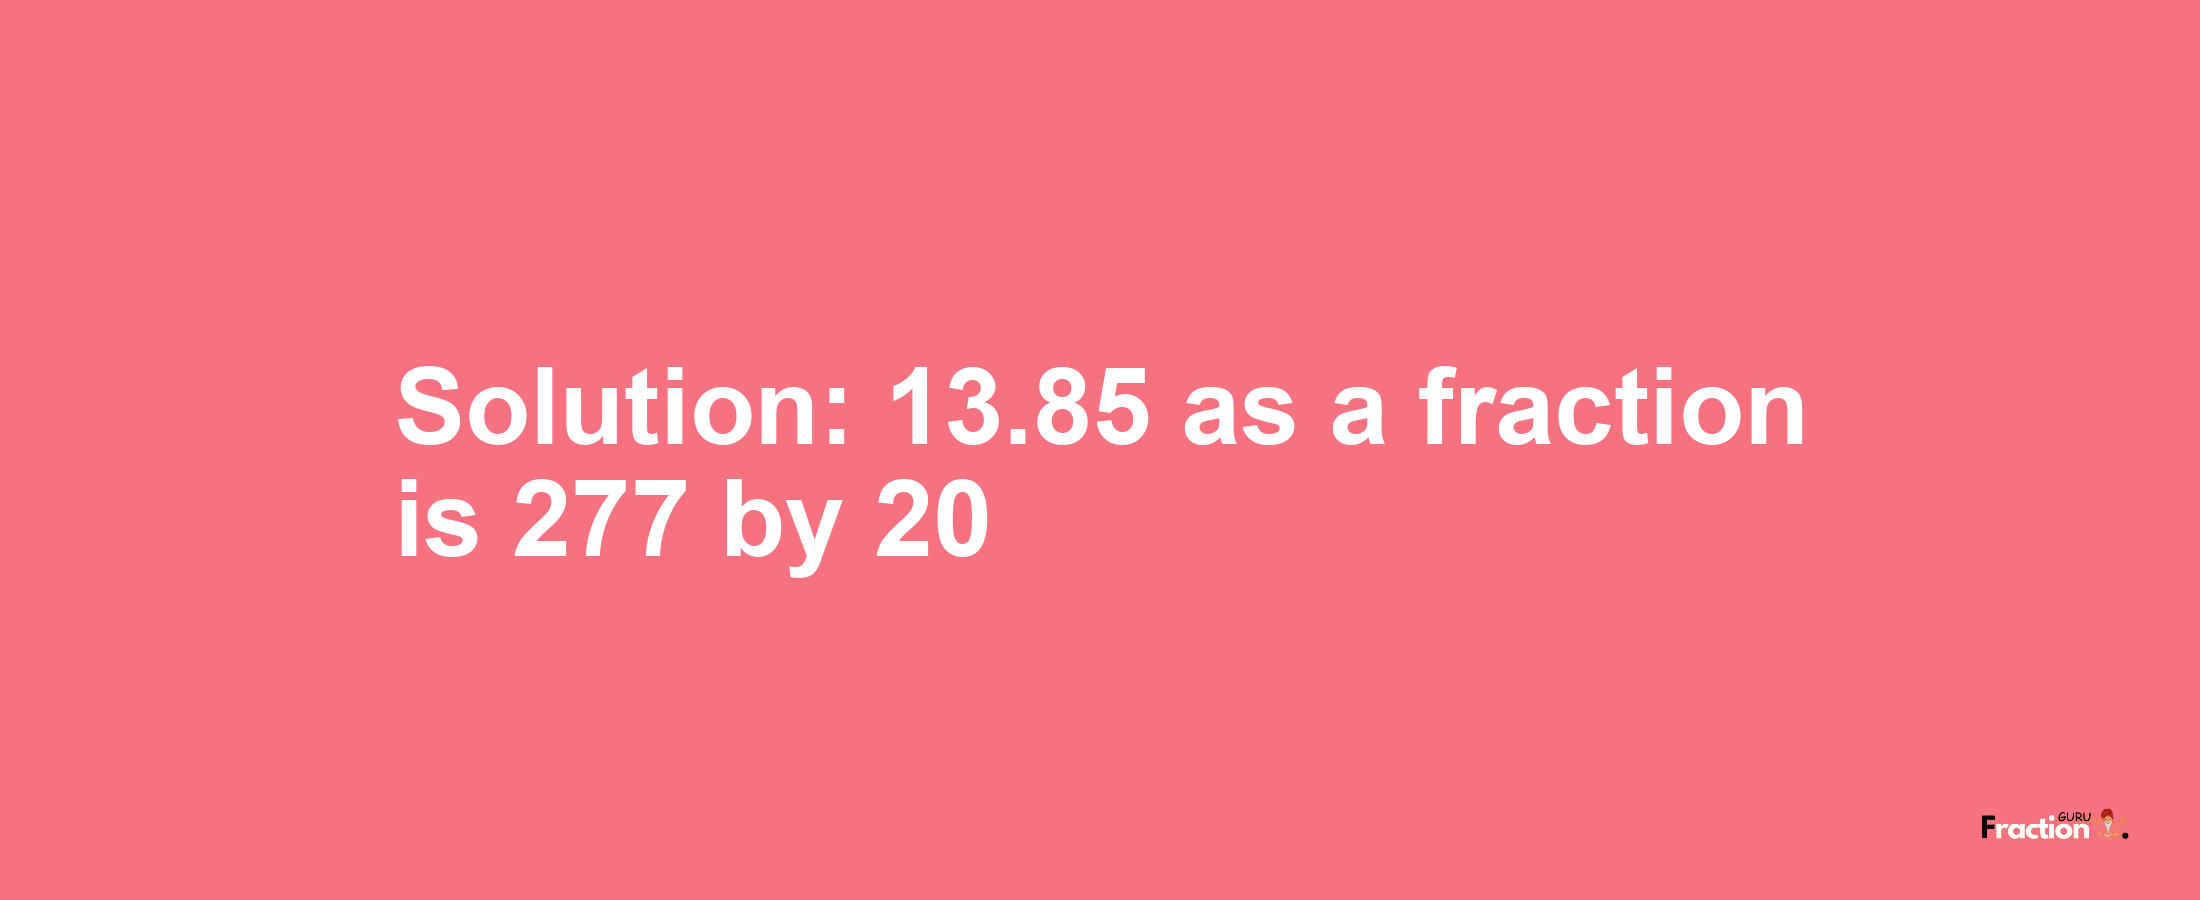 Solution:13.85 as a fraction is 277/20